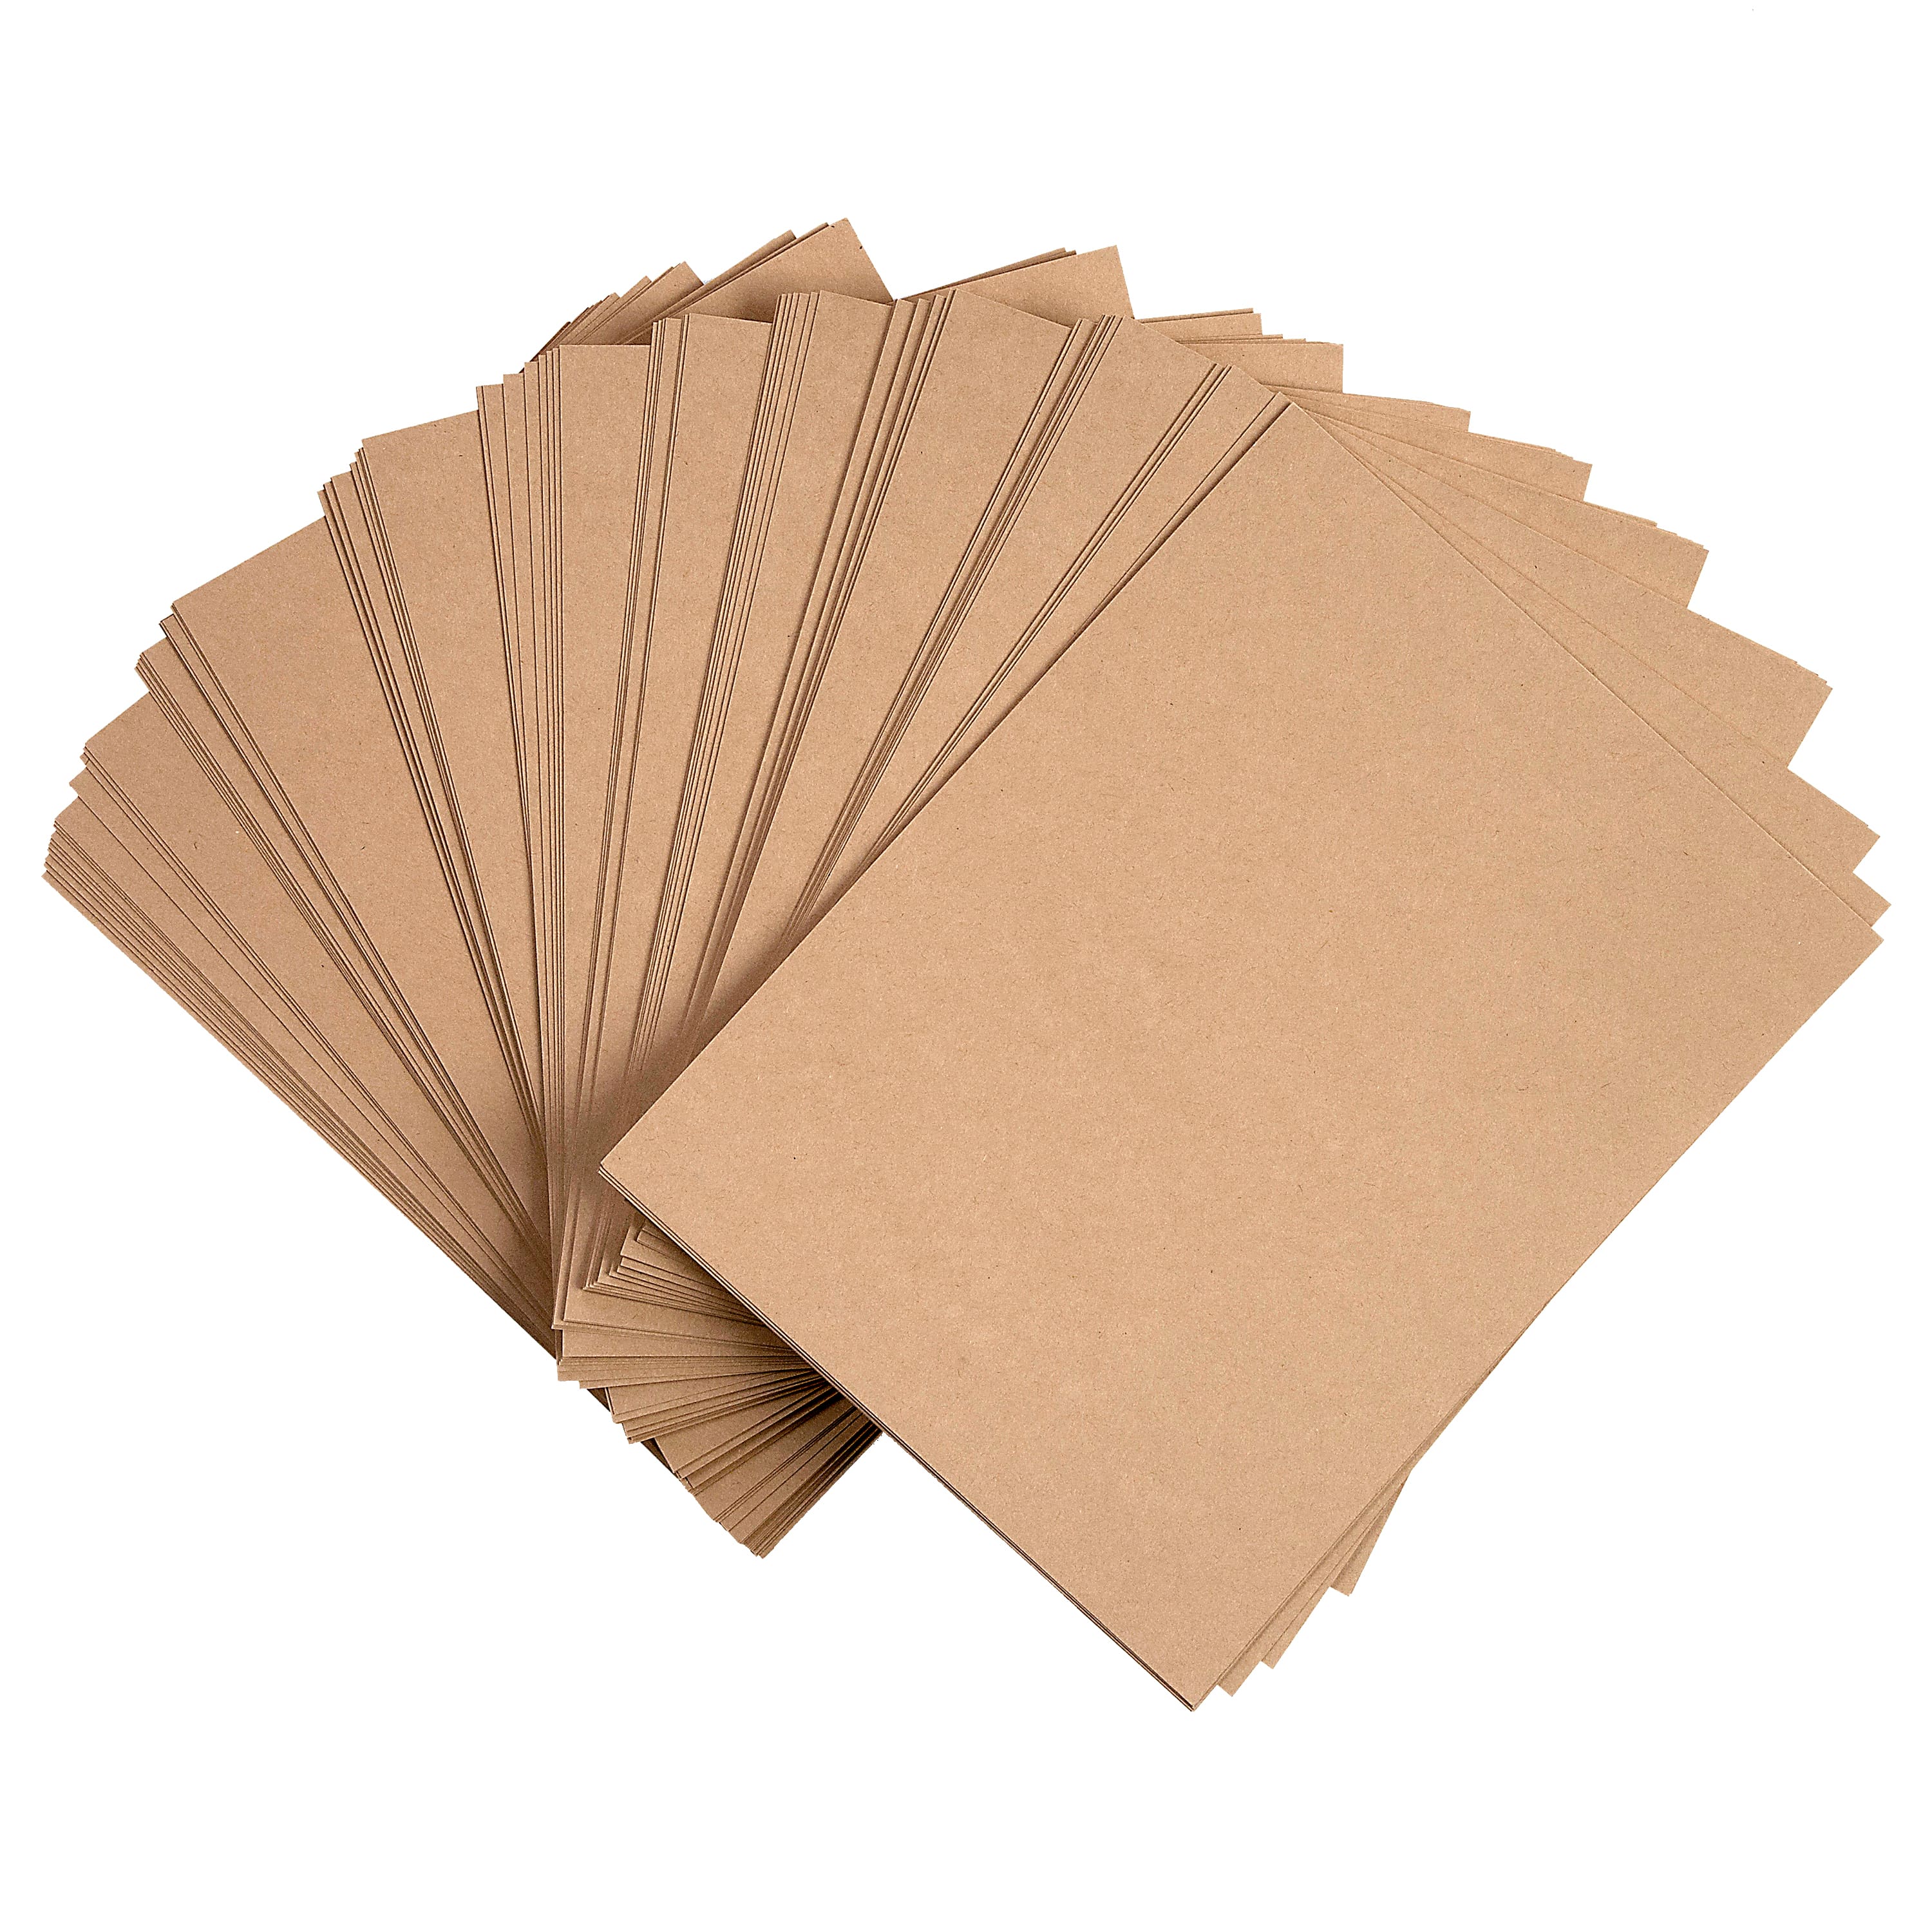 6 Packs: 100 ct. (600 total) Kraft 8.5 x 11 Cardstock Paper by  Recollections™